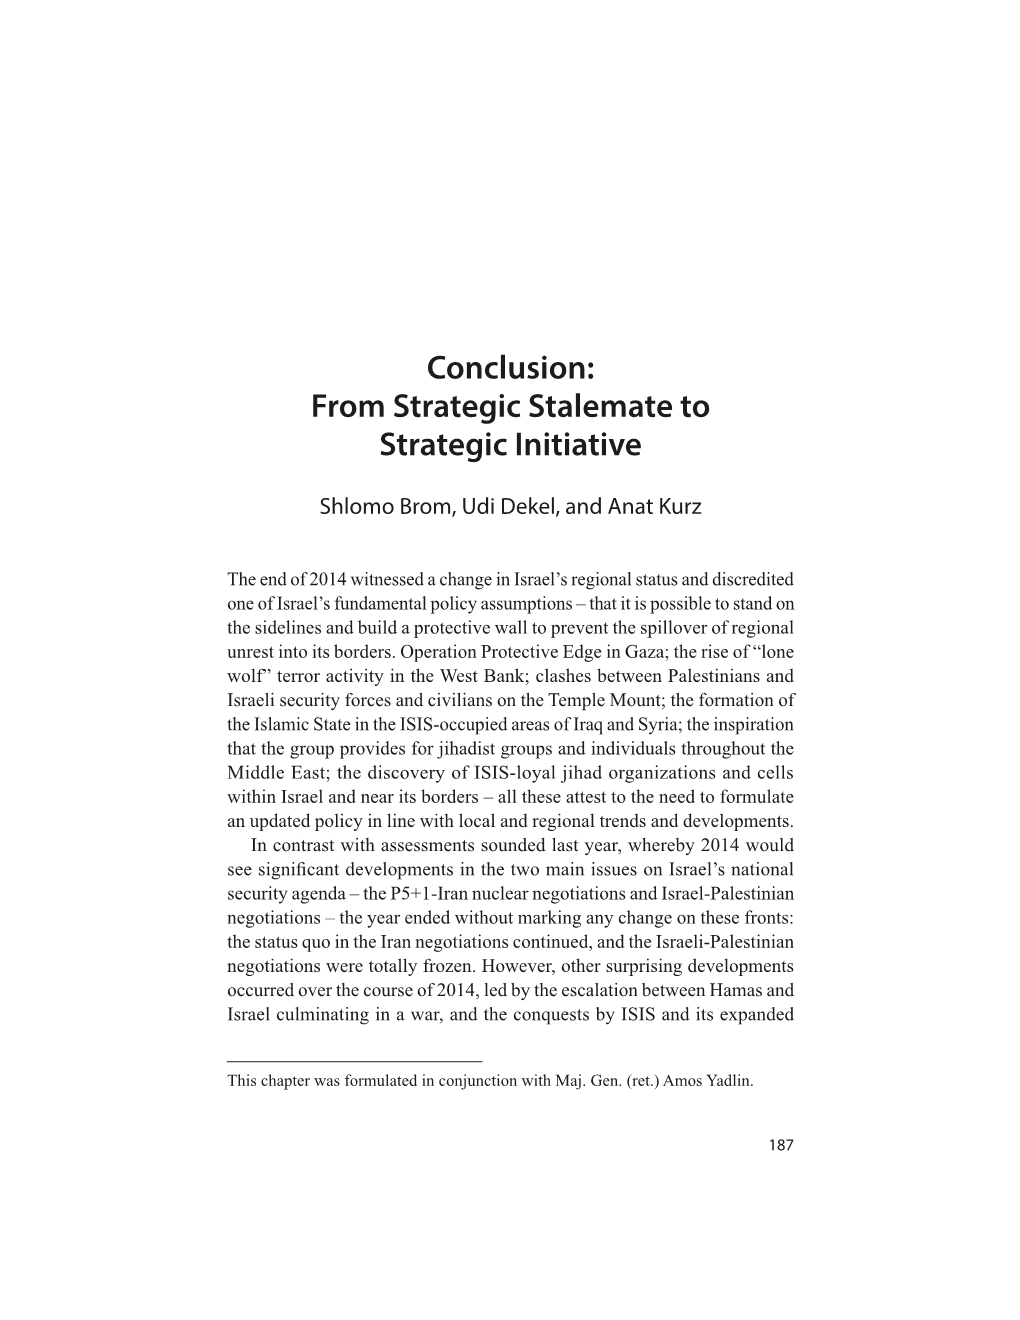 Conclusion: from Strategic Stalemate to Strategic Initiative